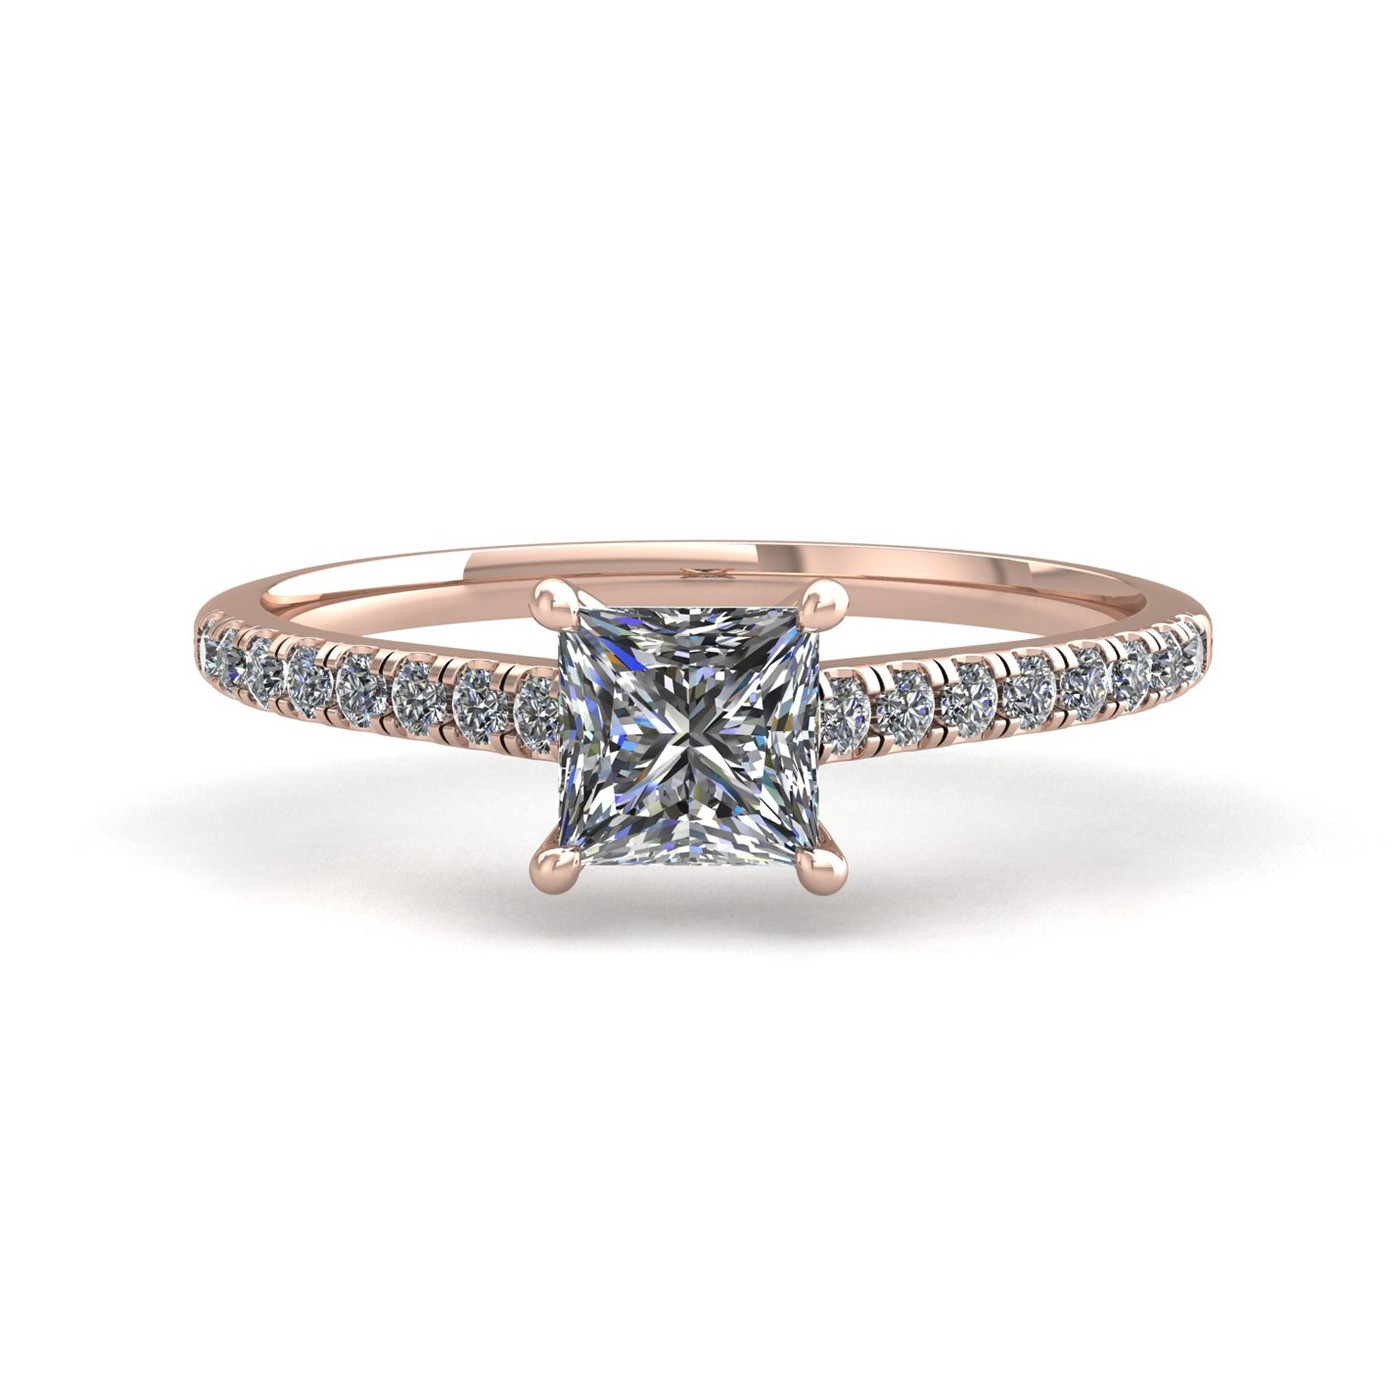 18k rose gold 2,00 ct 4 prongs princess cut diamond engagement ring with whisper thin pavÉ set band Photos & images